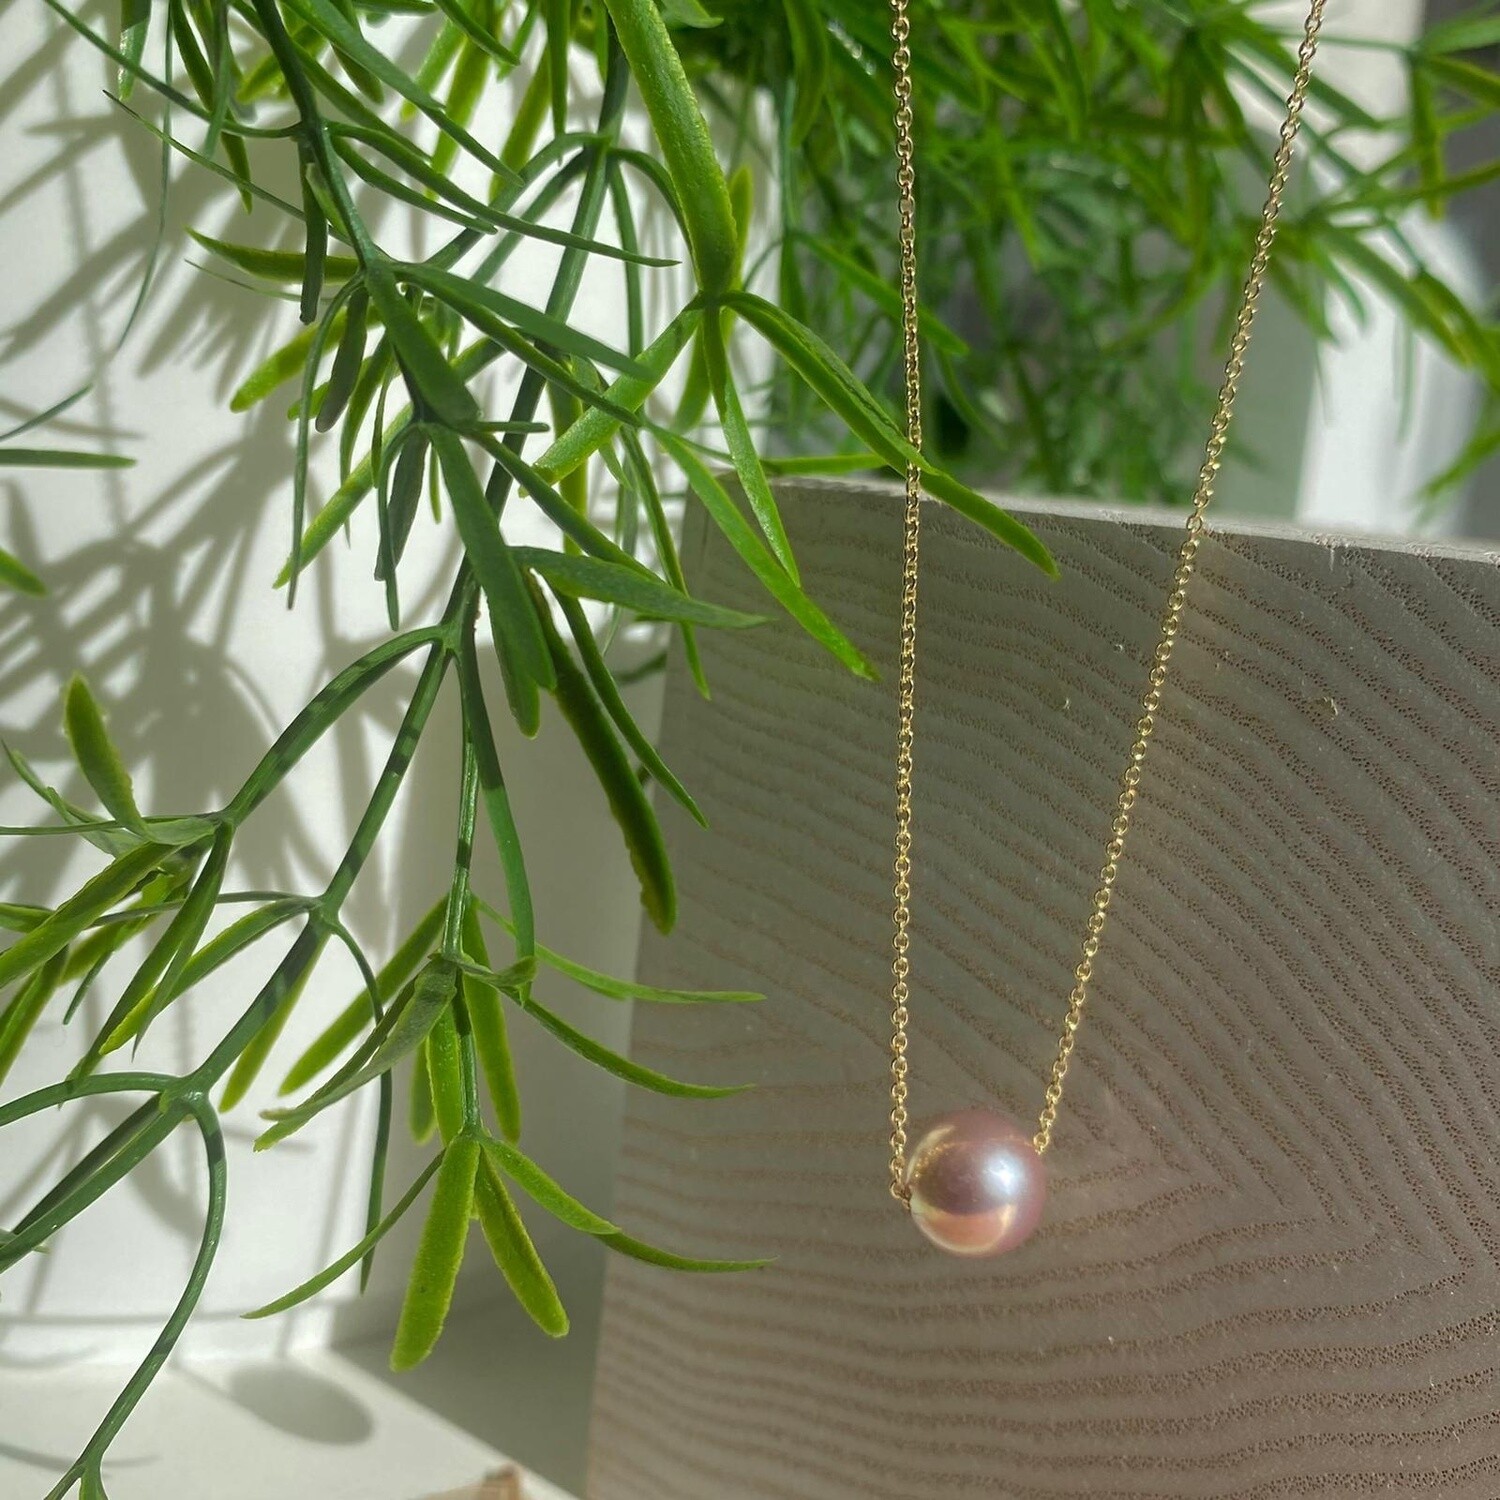 Floating pearl on gold chain